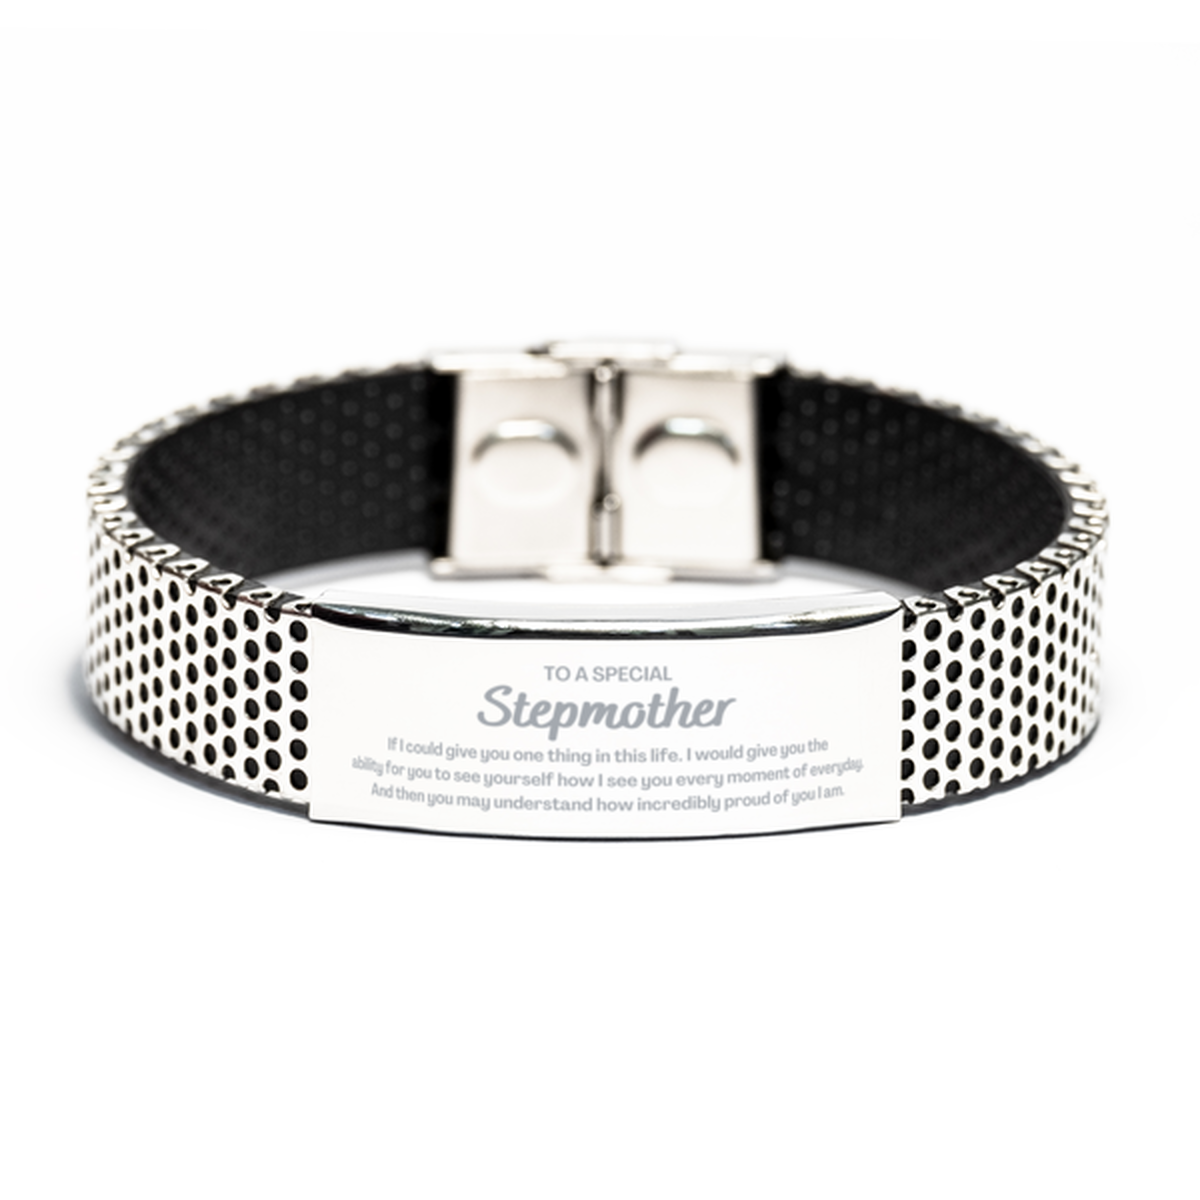 To My Stepmother Stainless Steel Bracelet, Gifts For Stepmother Engraved, Inspirational Gifts for Christmas Birthday, Epic Gifts for Stepmother To A Special Stepmother how incredibly proud of you I am